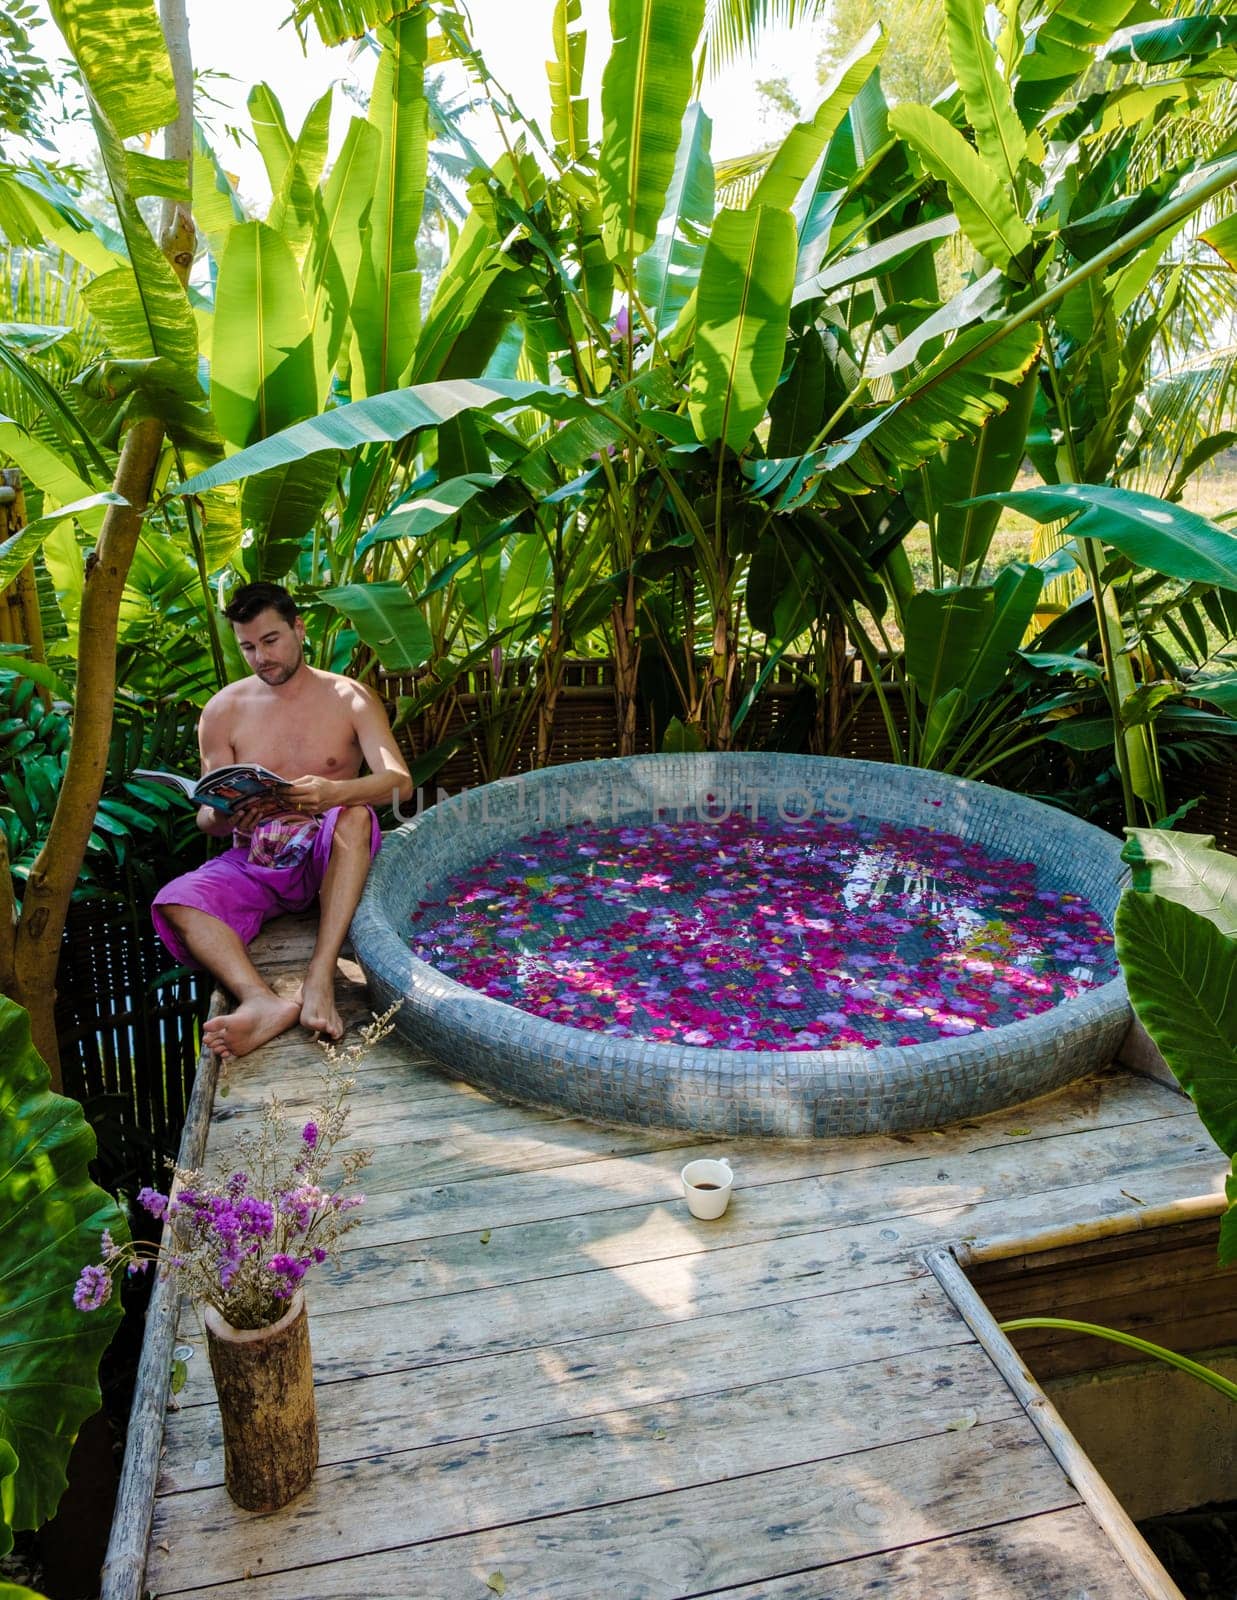 men reading a book at a bathtub in the rainforest of Thailand during a vacation with flowers in the bath